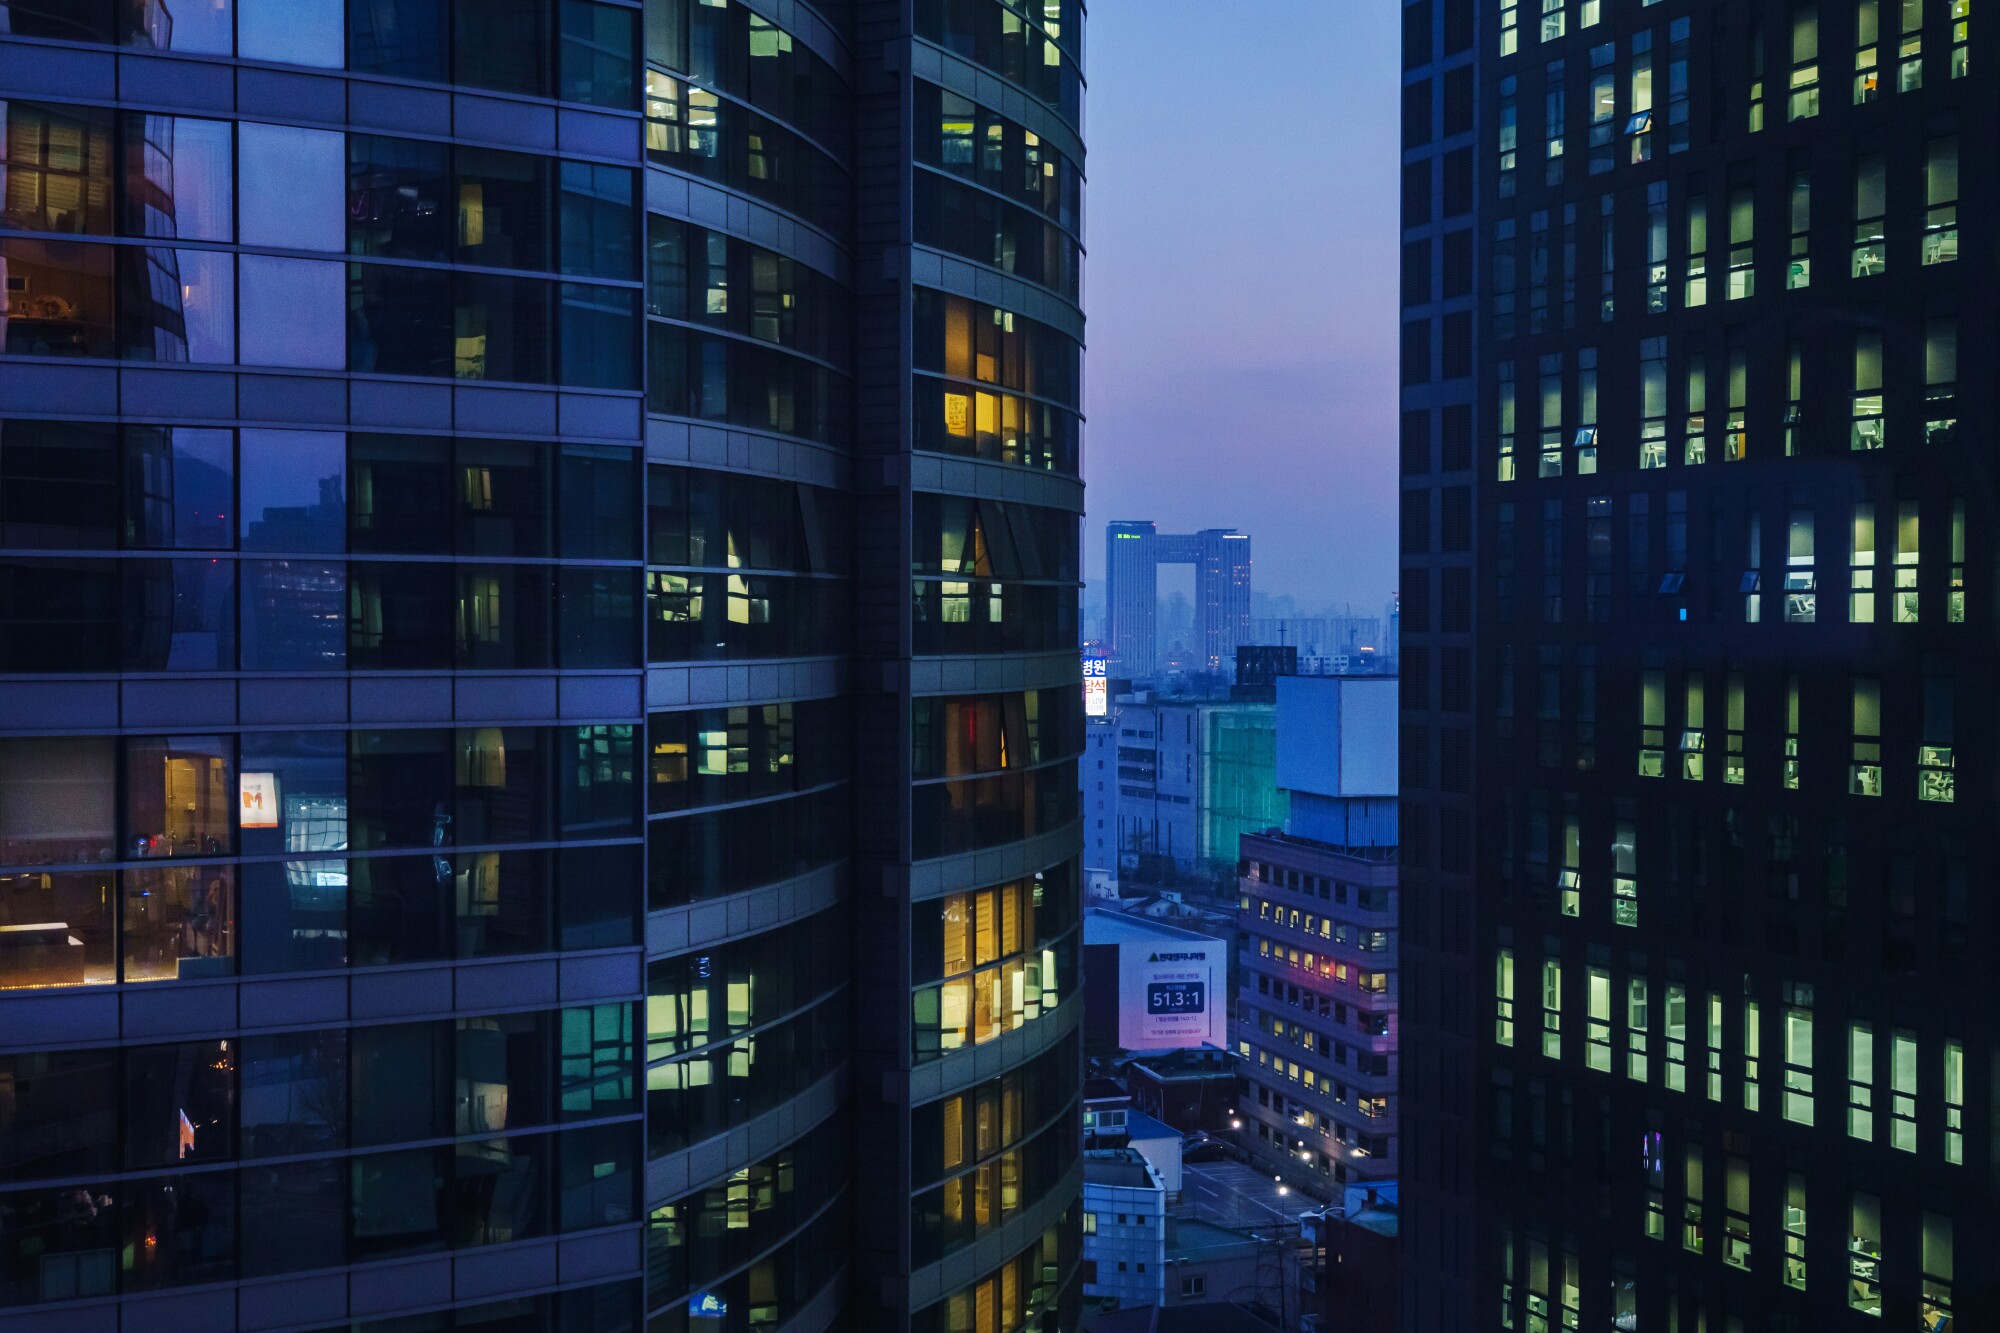 Apartment buildings light up in the evening as people return home from work in Seoul